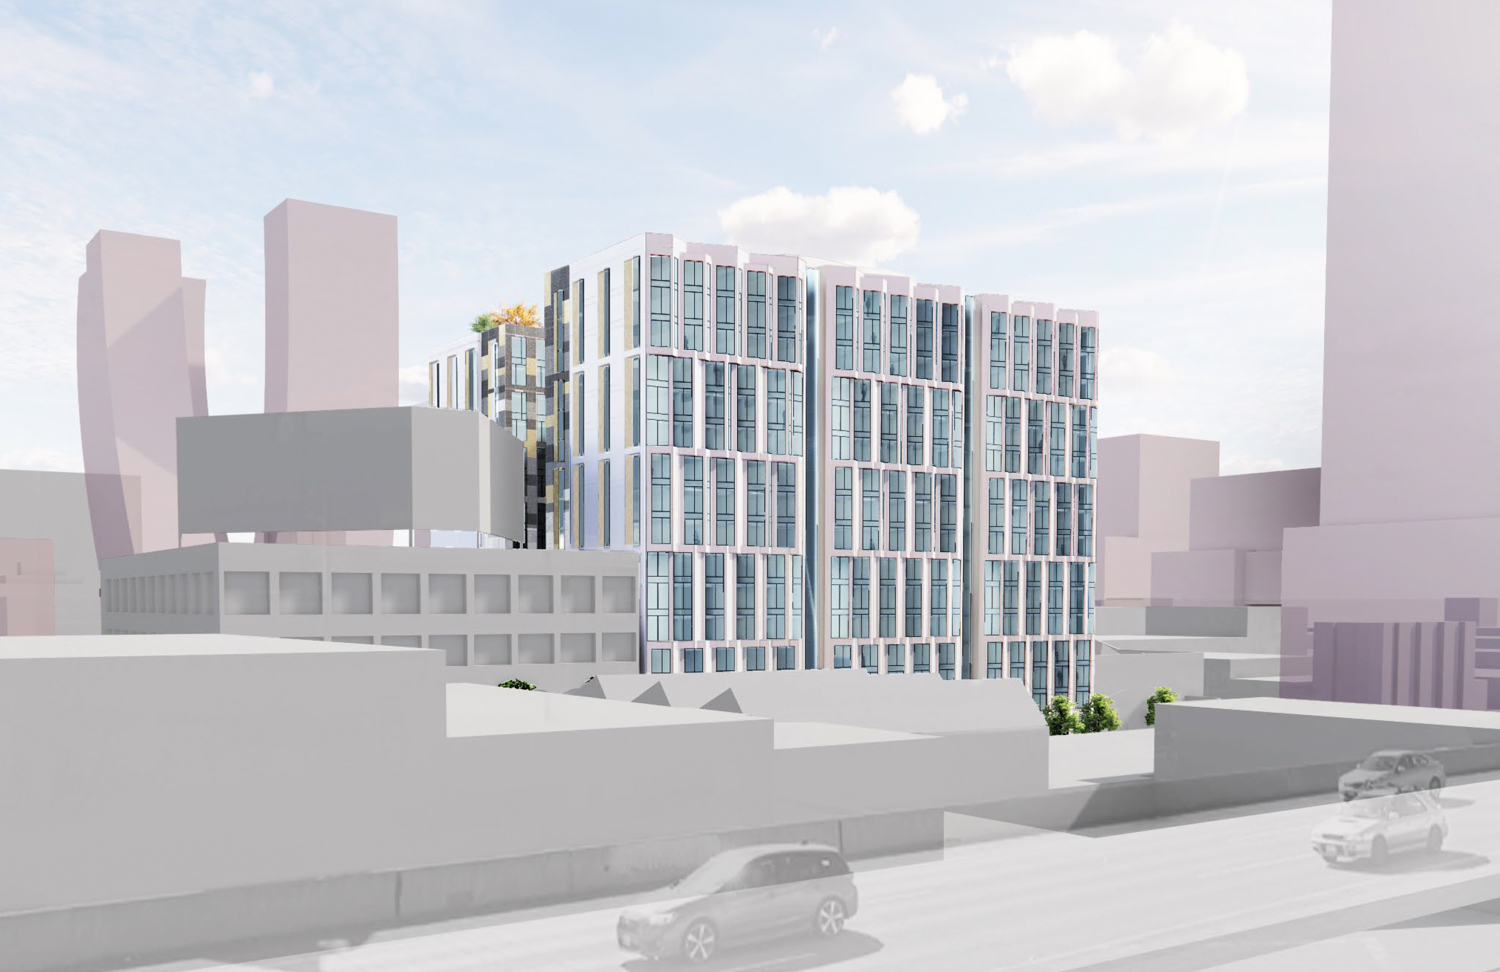 555 Bryant Street with the twisting 665 Fourth Street proposal illustrated in the background, rendering by Solomon Cordwell Buenz